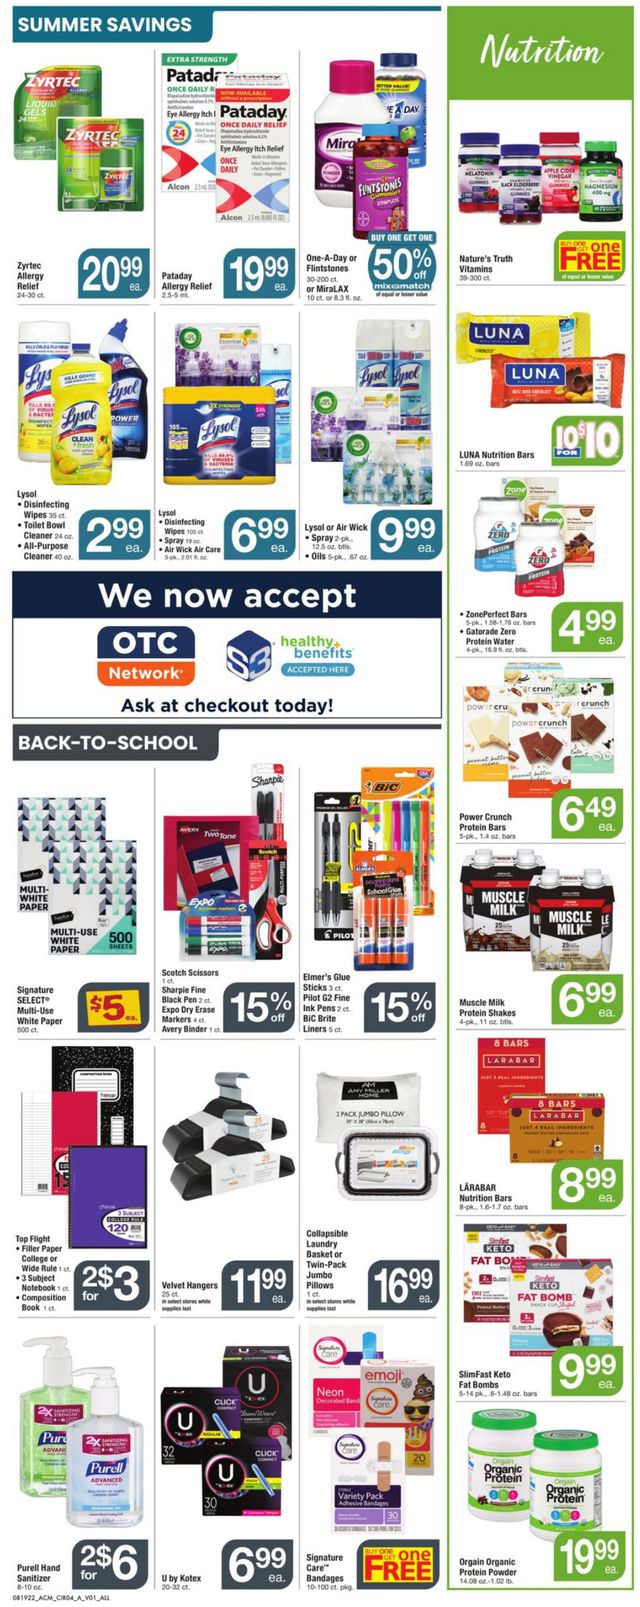 Acme Ad from 08/19/2022